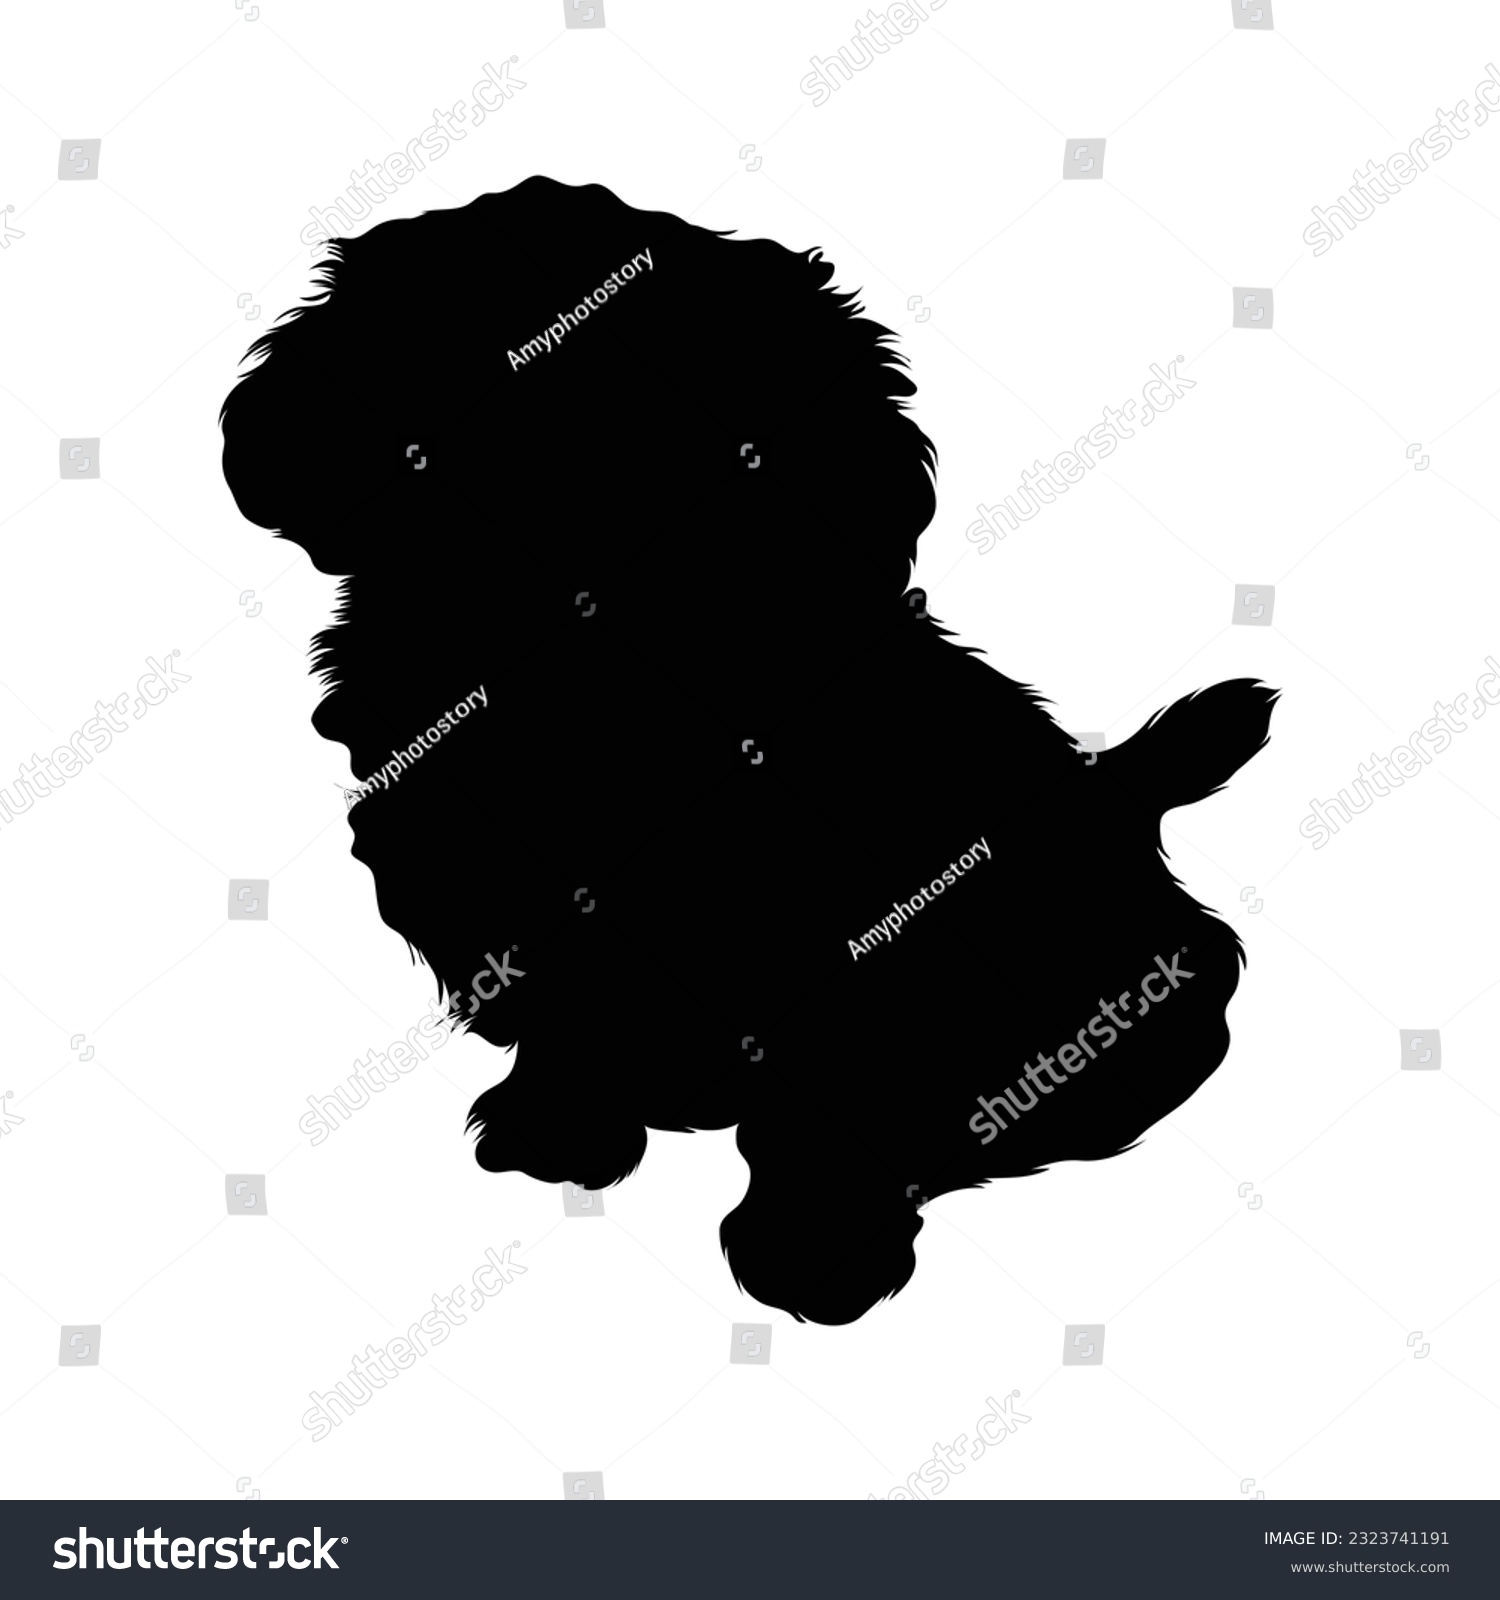 SVG of Sitting Shih Tzu Silhouette Good To Use For Element Print Book, Animal Book and Animal Content svg